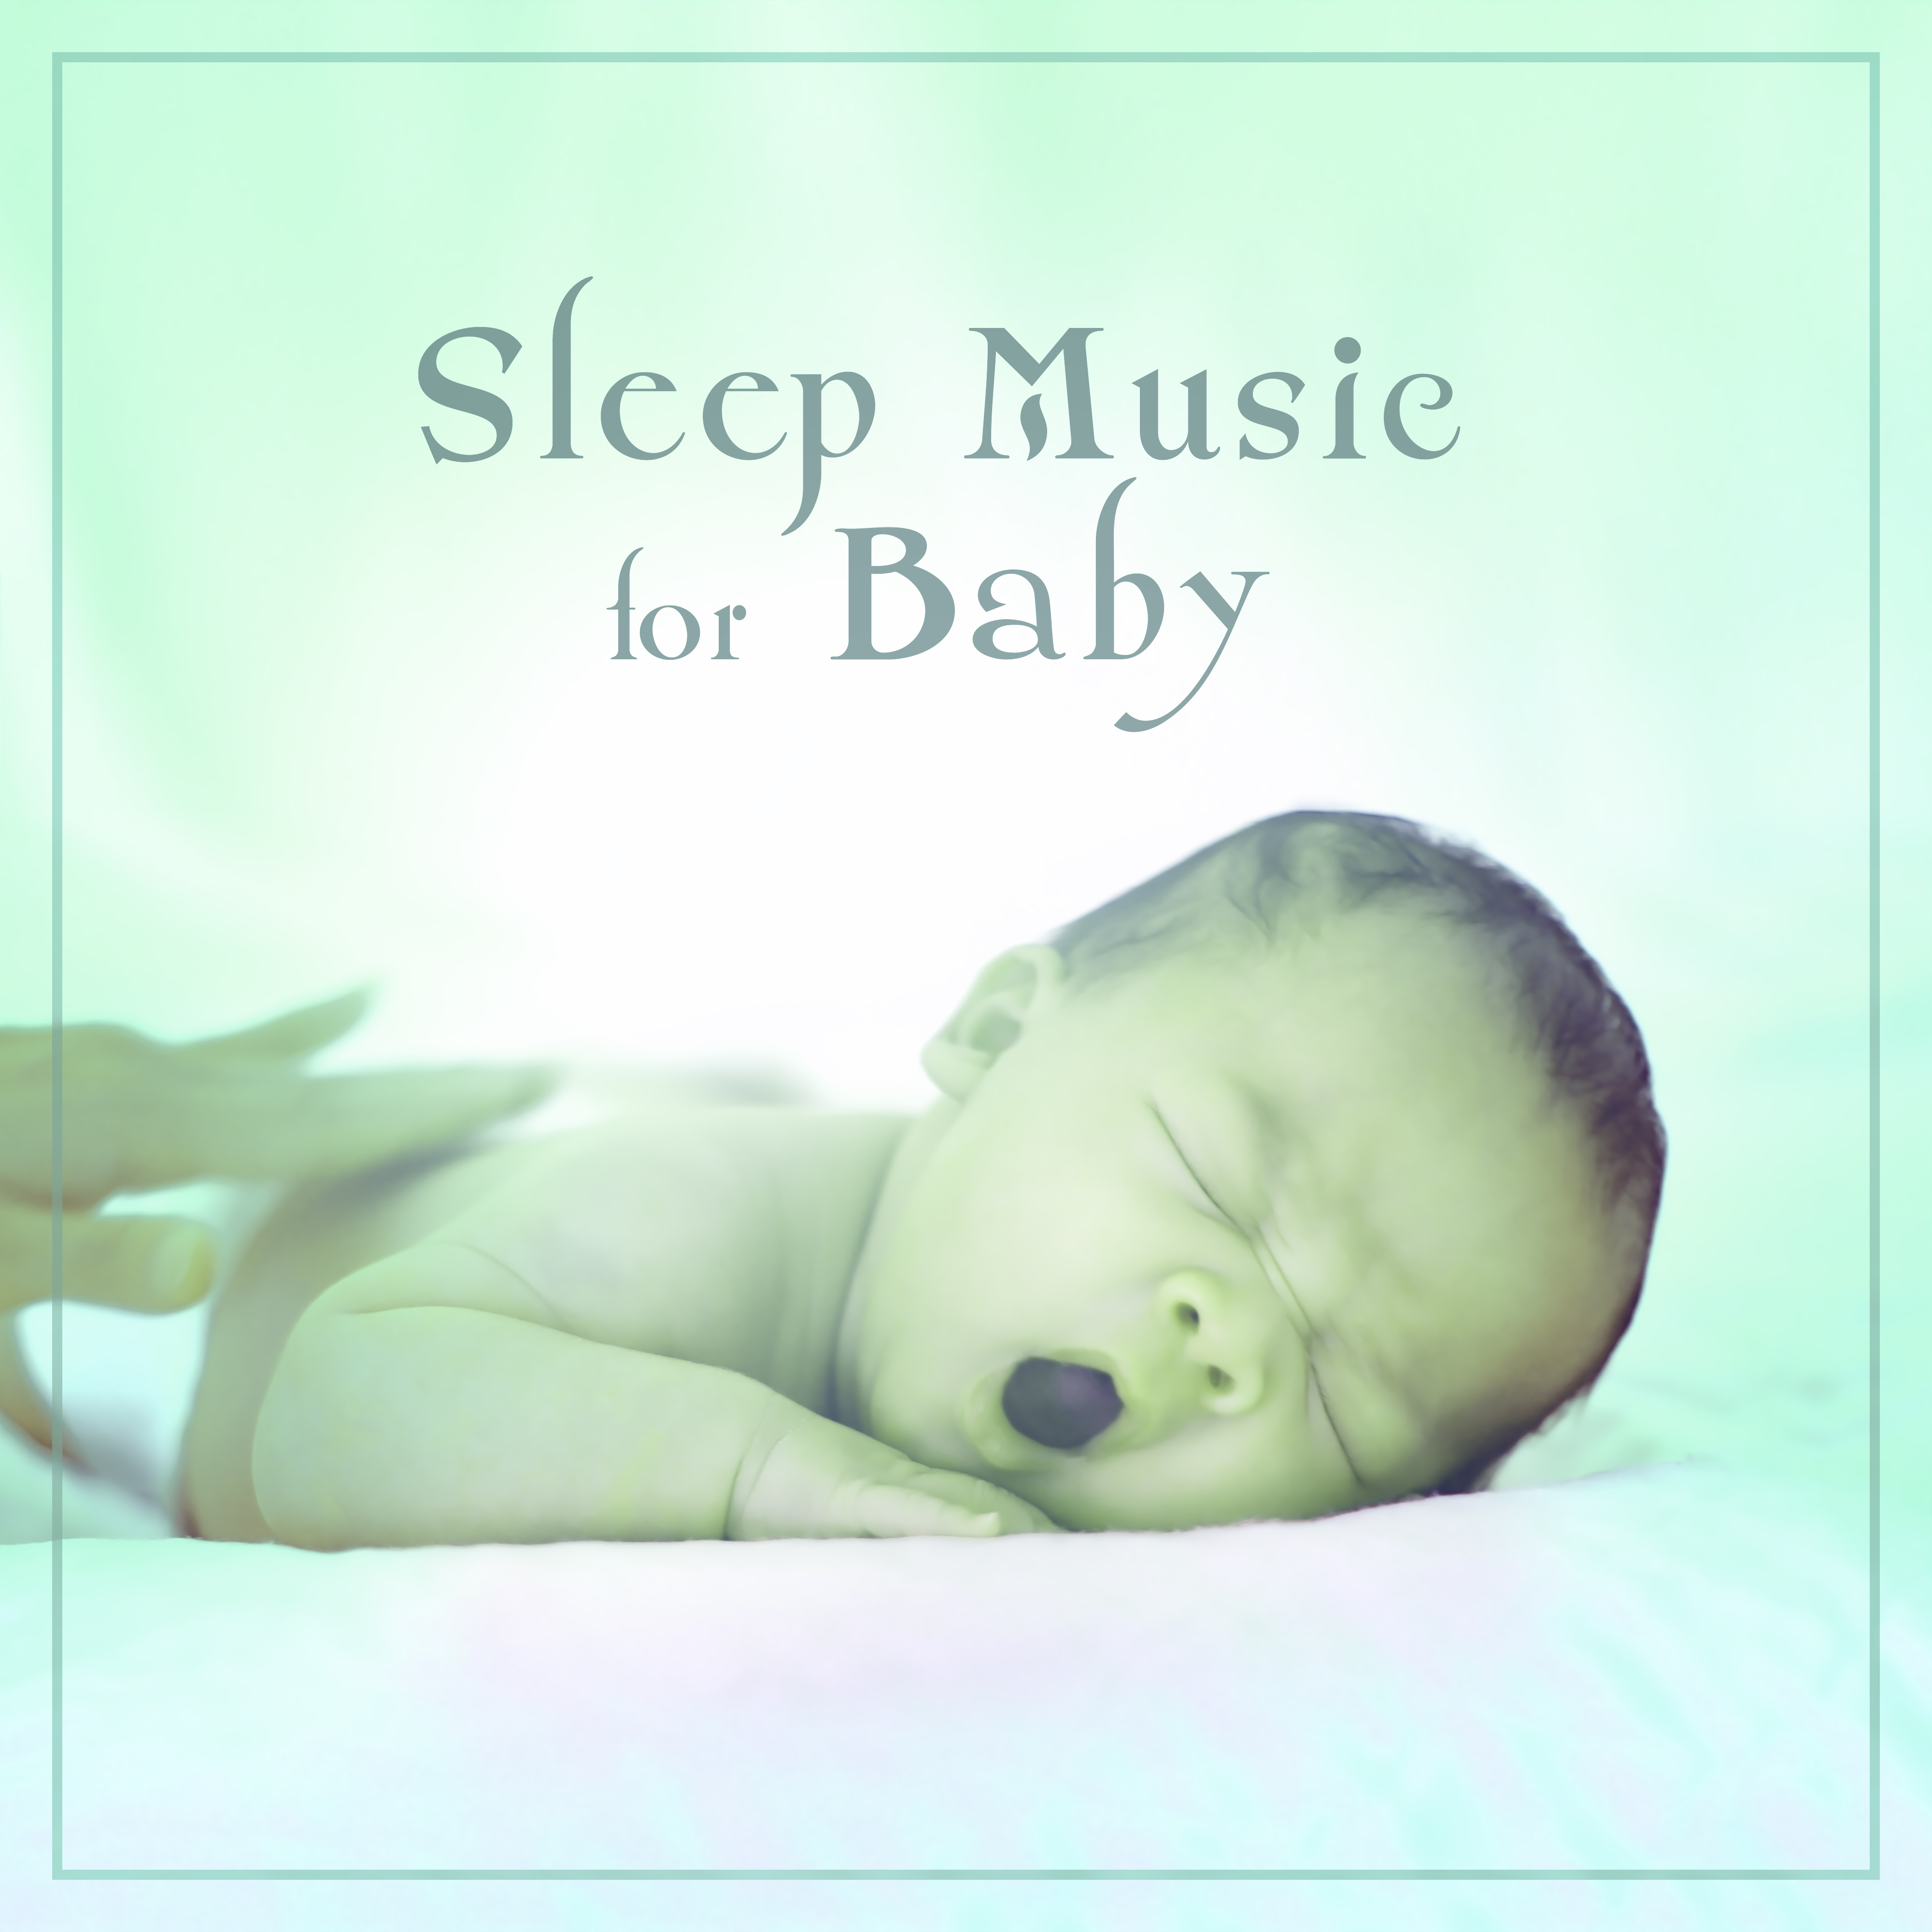 Sleep Music for Baby  Calm Down with New Age, Baby Lullabies, Soothing Night with Gentle Music